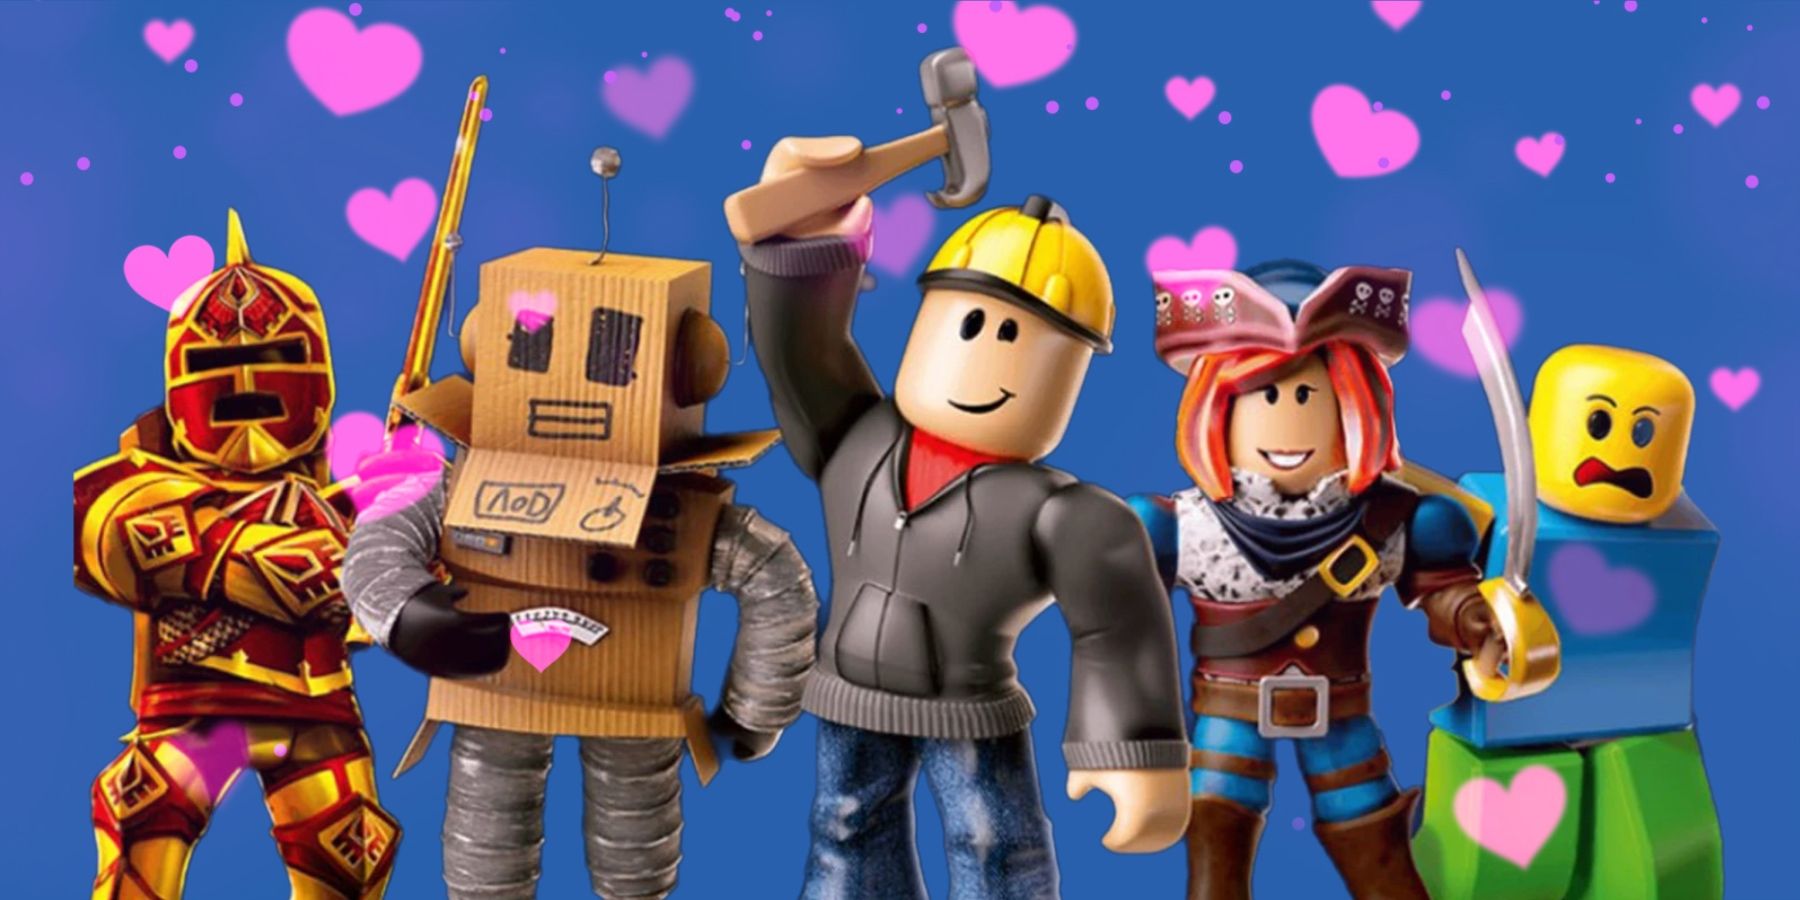 NO ONLINE DATING IN ROBLOX 